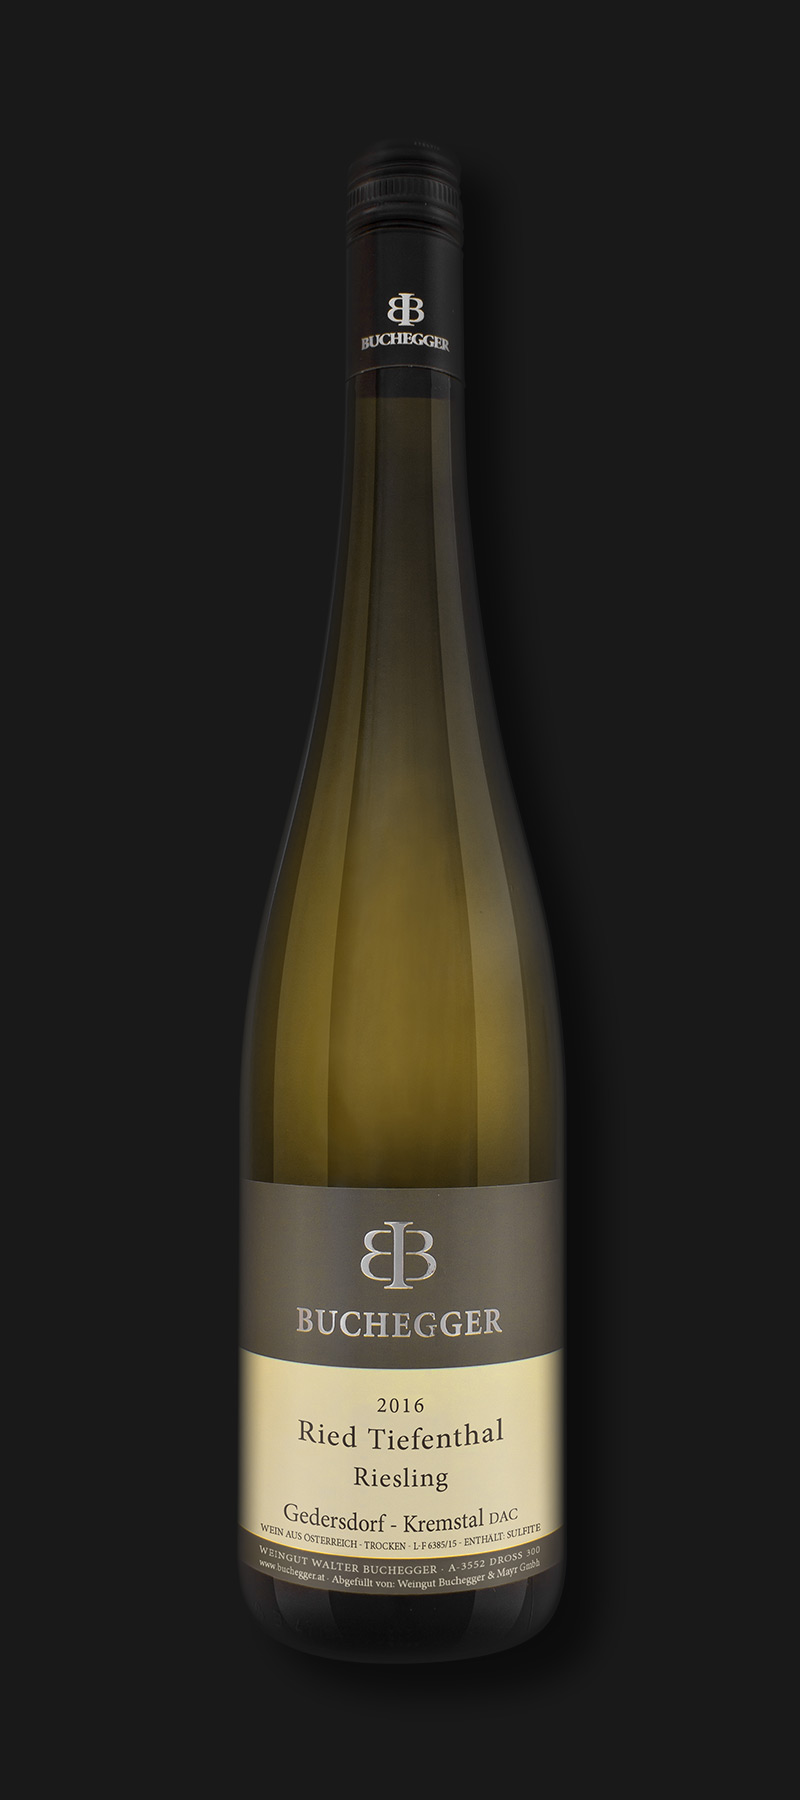 Buchegger Riesling Tiefenthal 2016